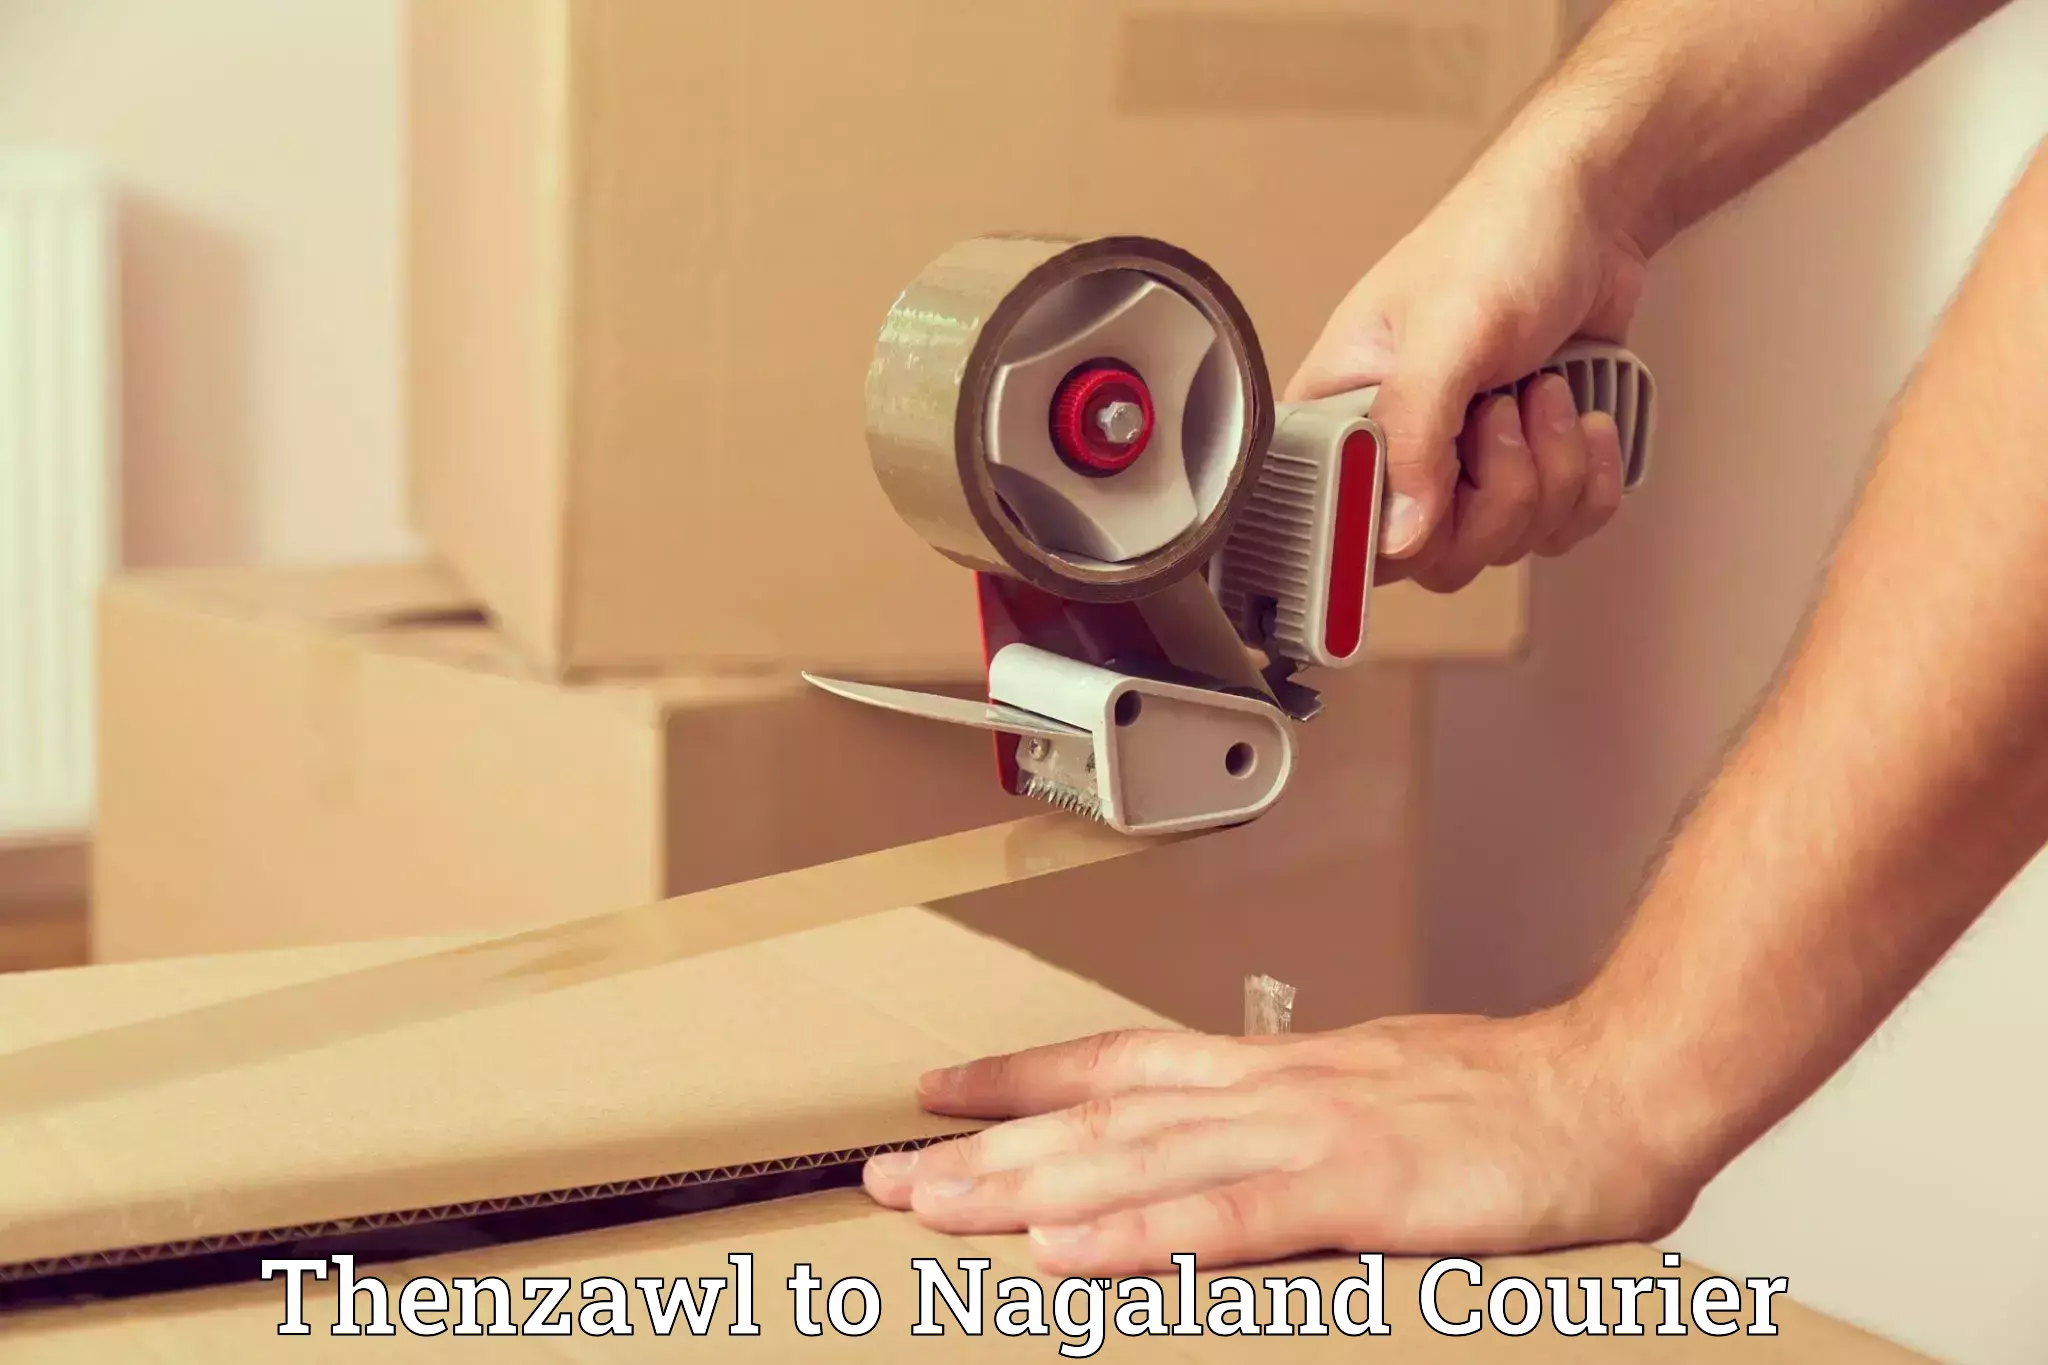 Moving and packing experts Thenzawl to Nagaland